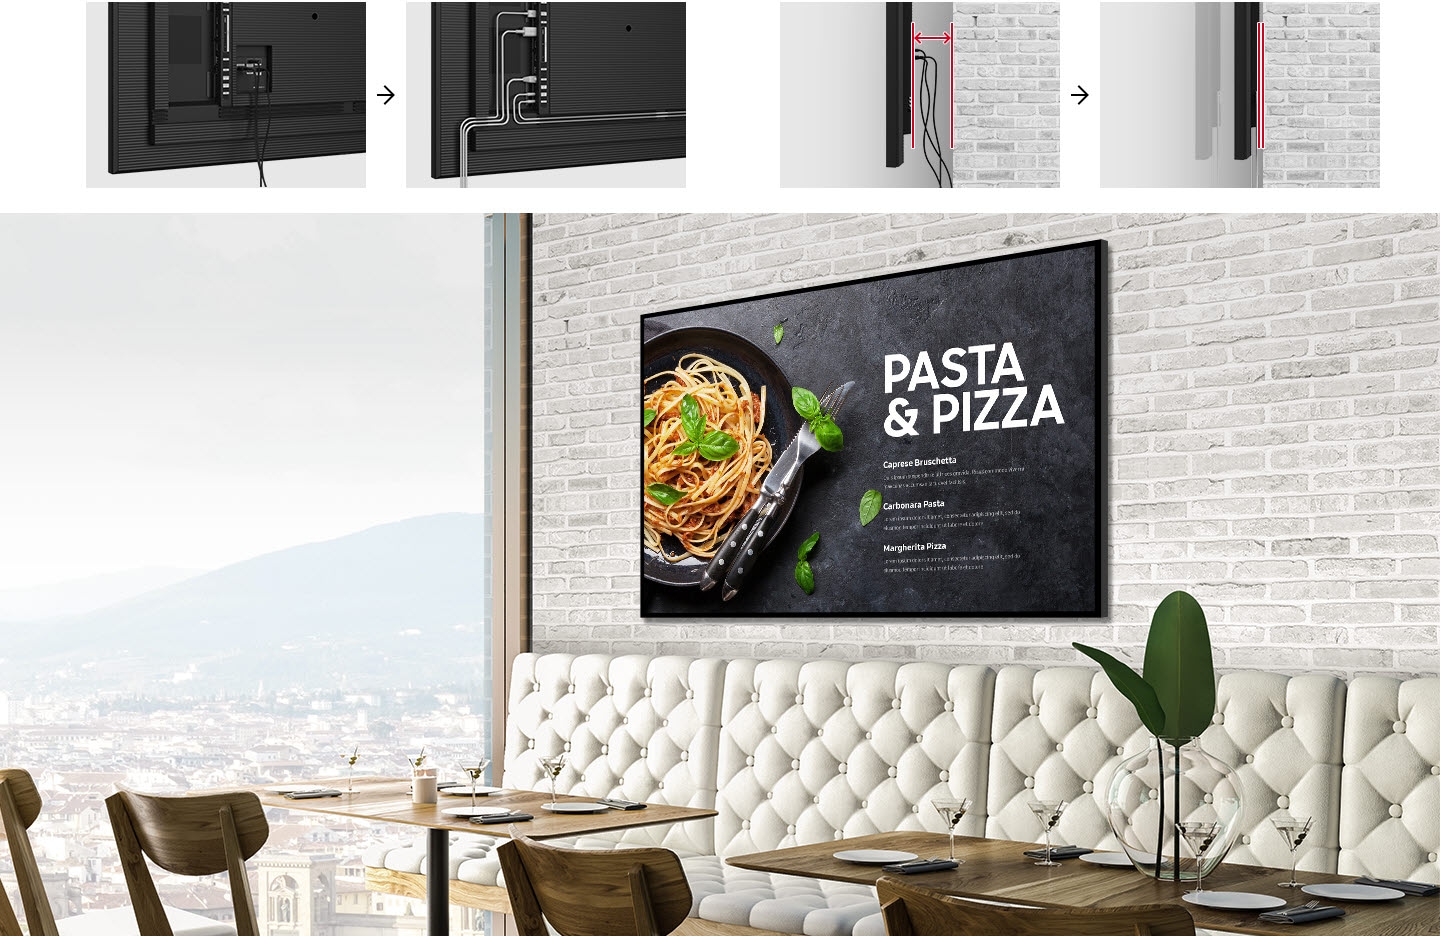 Compared to existing products, the QBB product has a cleaner rear line arrangement and a reduced installation distance from the wall. In QBB, the product and the wall are closely attached, and the cables are not exposed. The menu board is displayed on QBB on the wall of a restaurant.